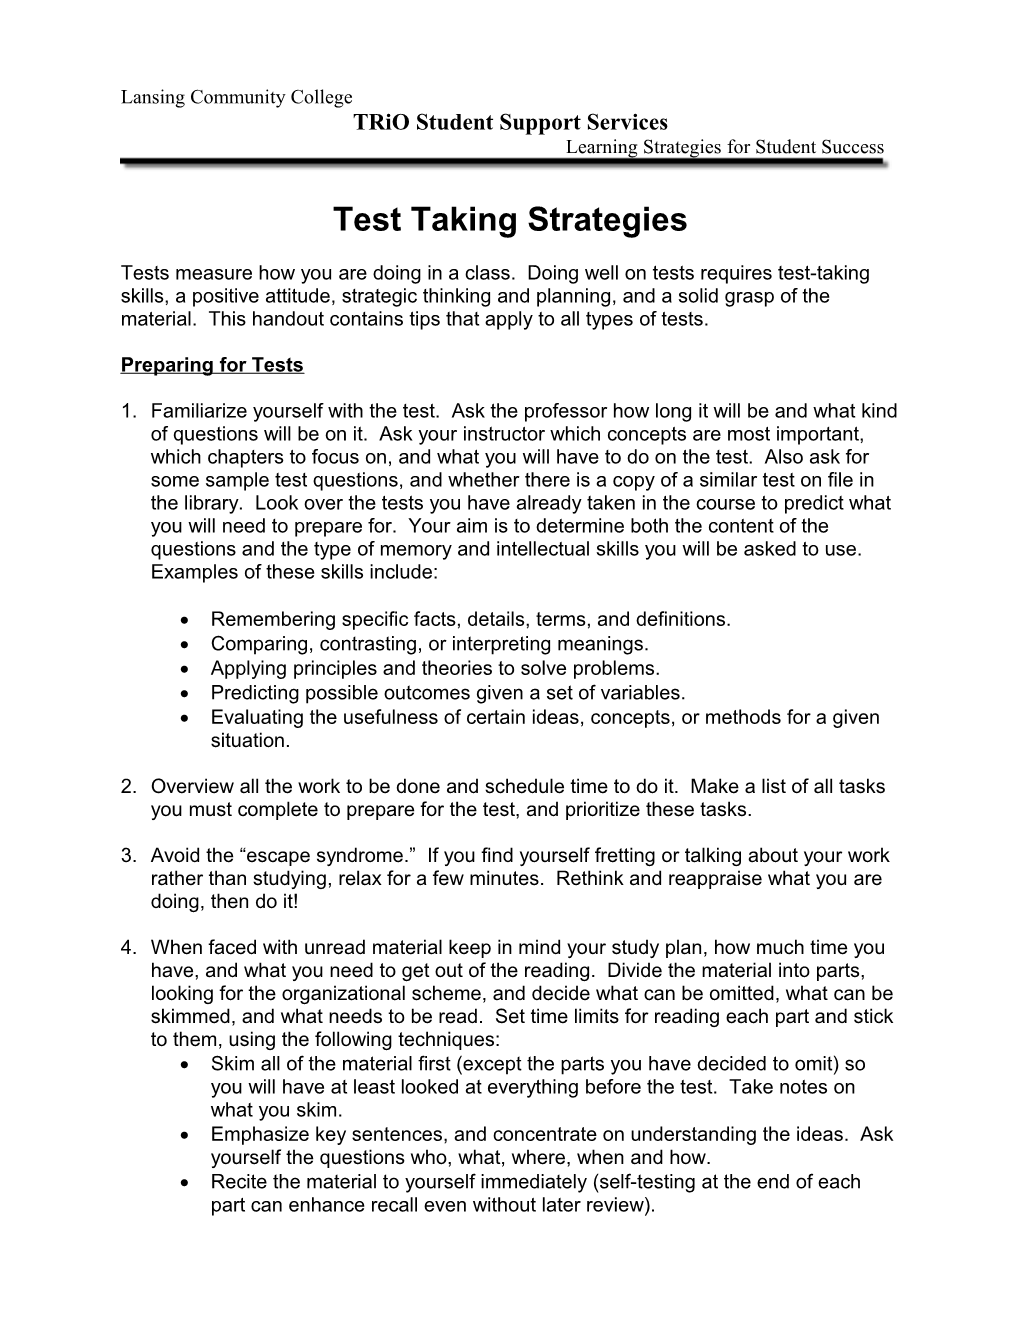 Study Skills - Test Taking - Trio Student Support Services